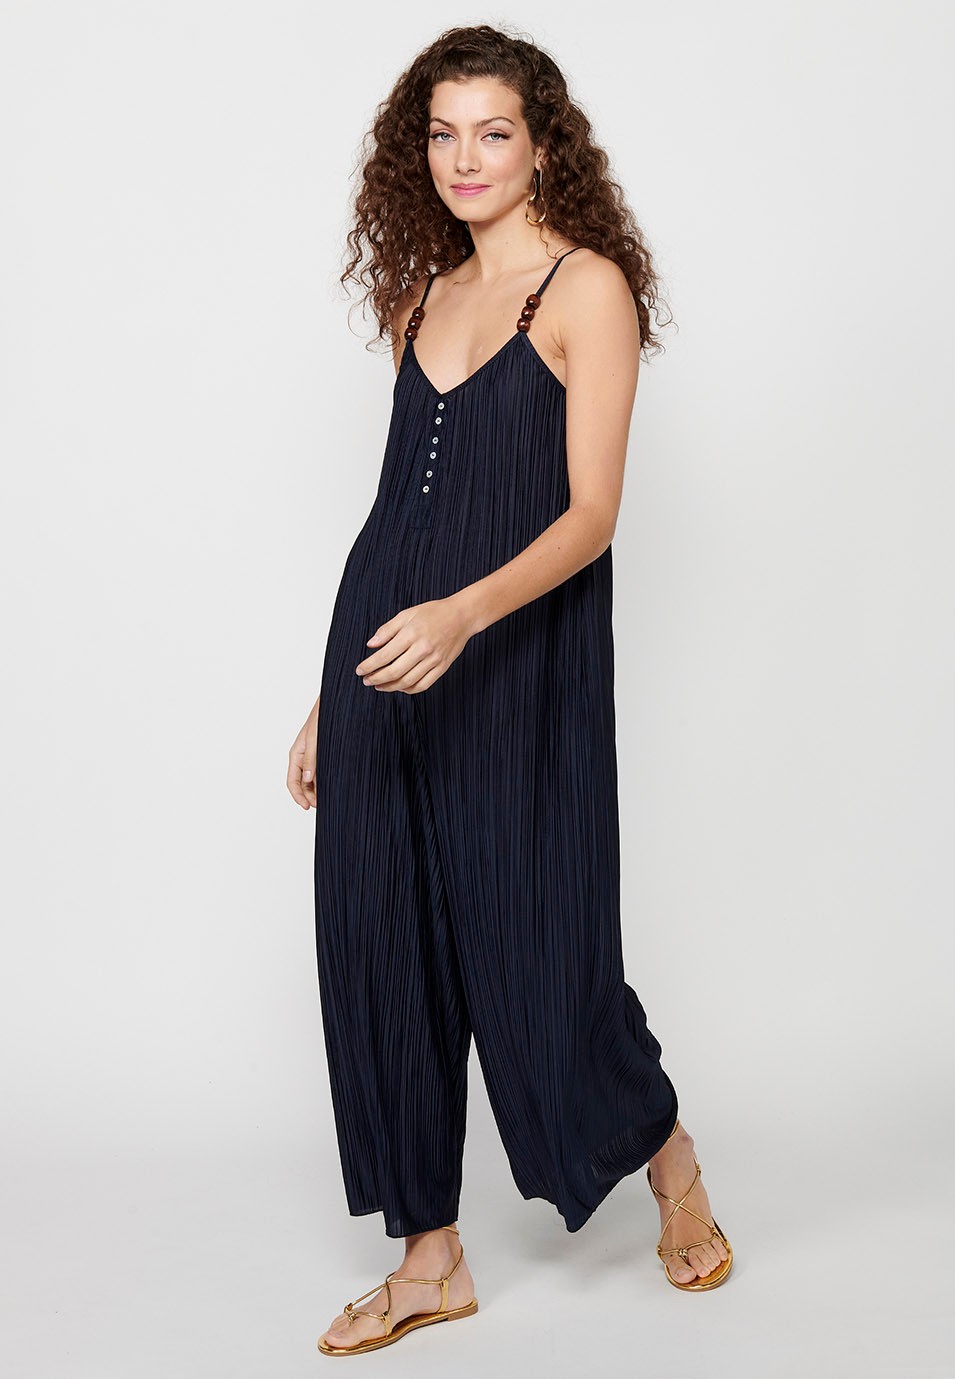 Women's Loose Fabric Jumpsuit Dress with Folds and Adjustable Blue Straps